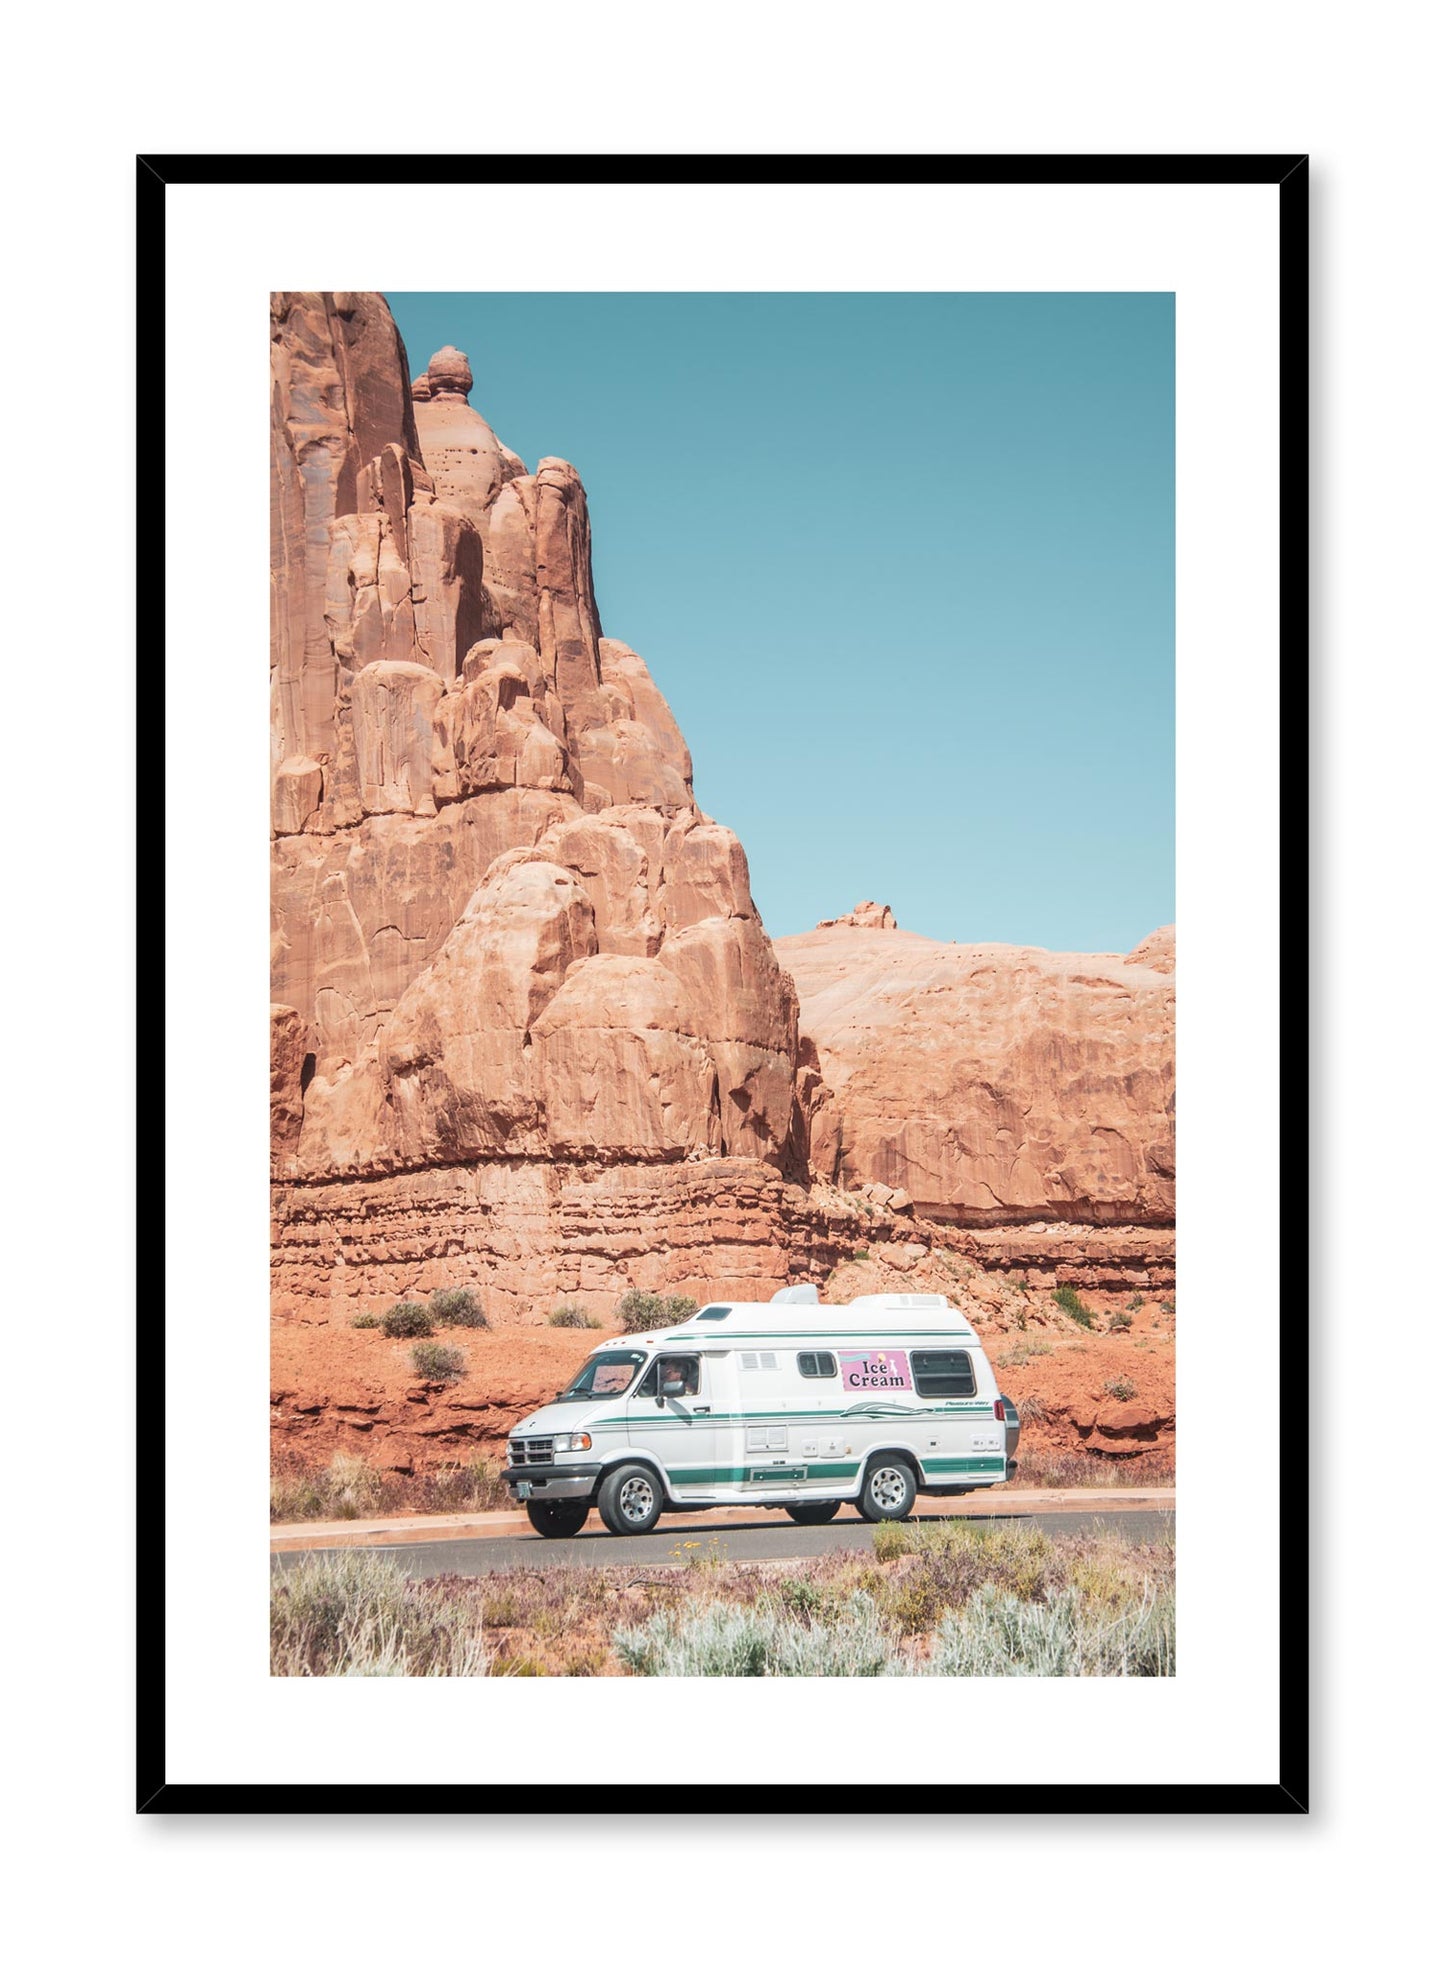 Minimalist design poster by Opposite Wall with photography of camper van on a road trip